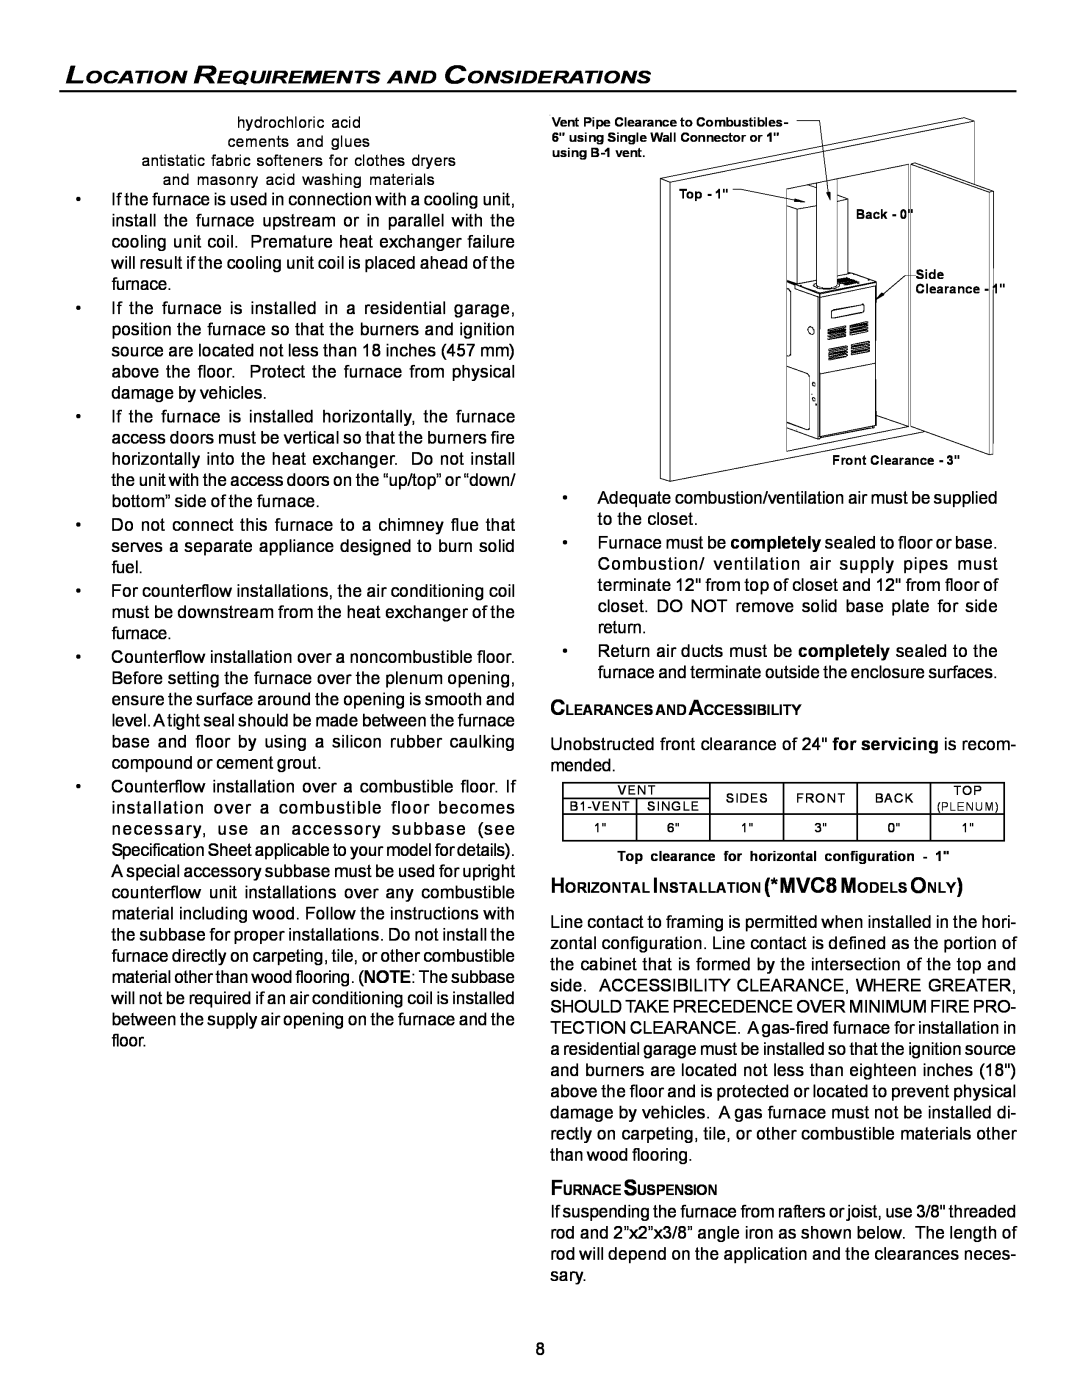 Goodman Mfg VC8 instruction manual Location Requirements And Considerations 